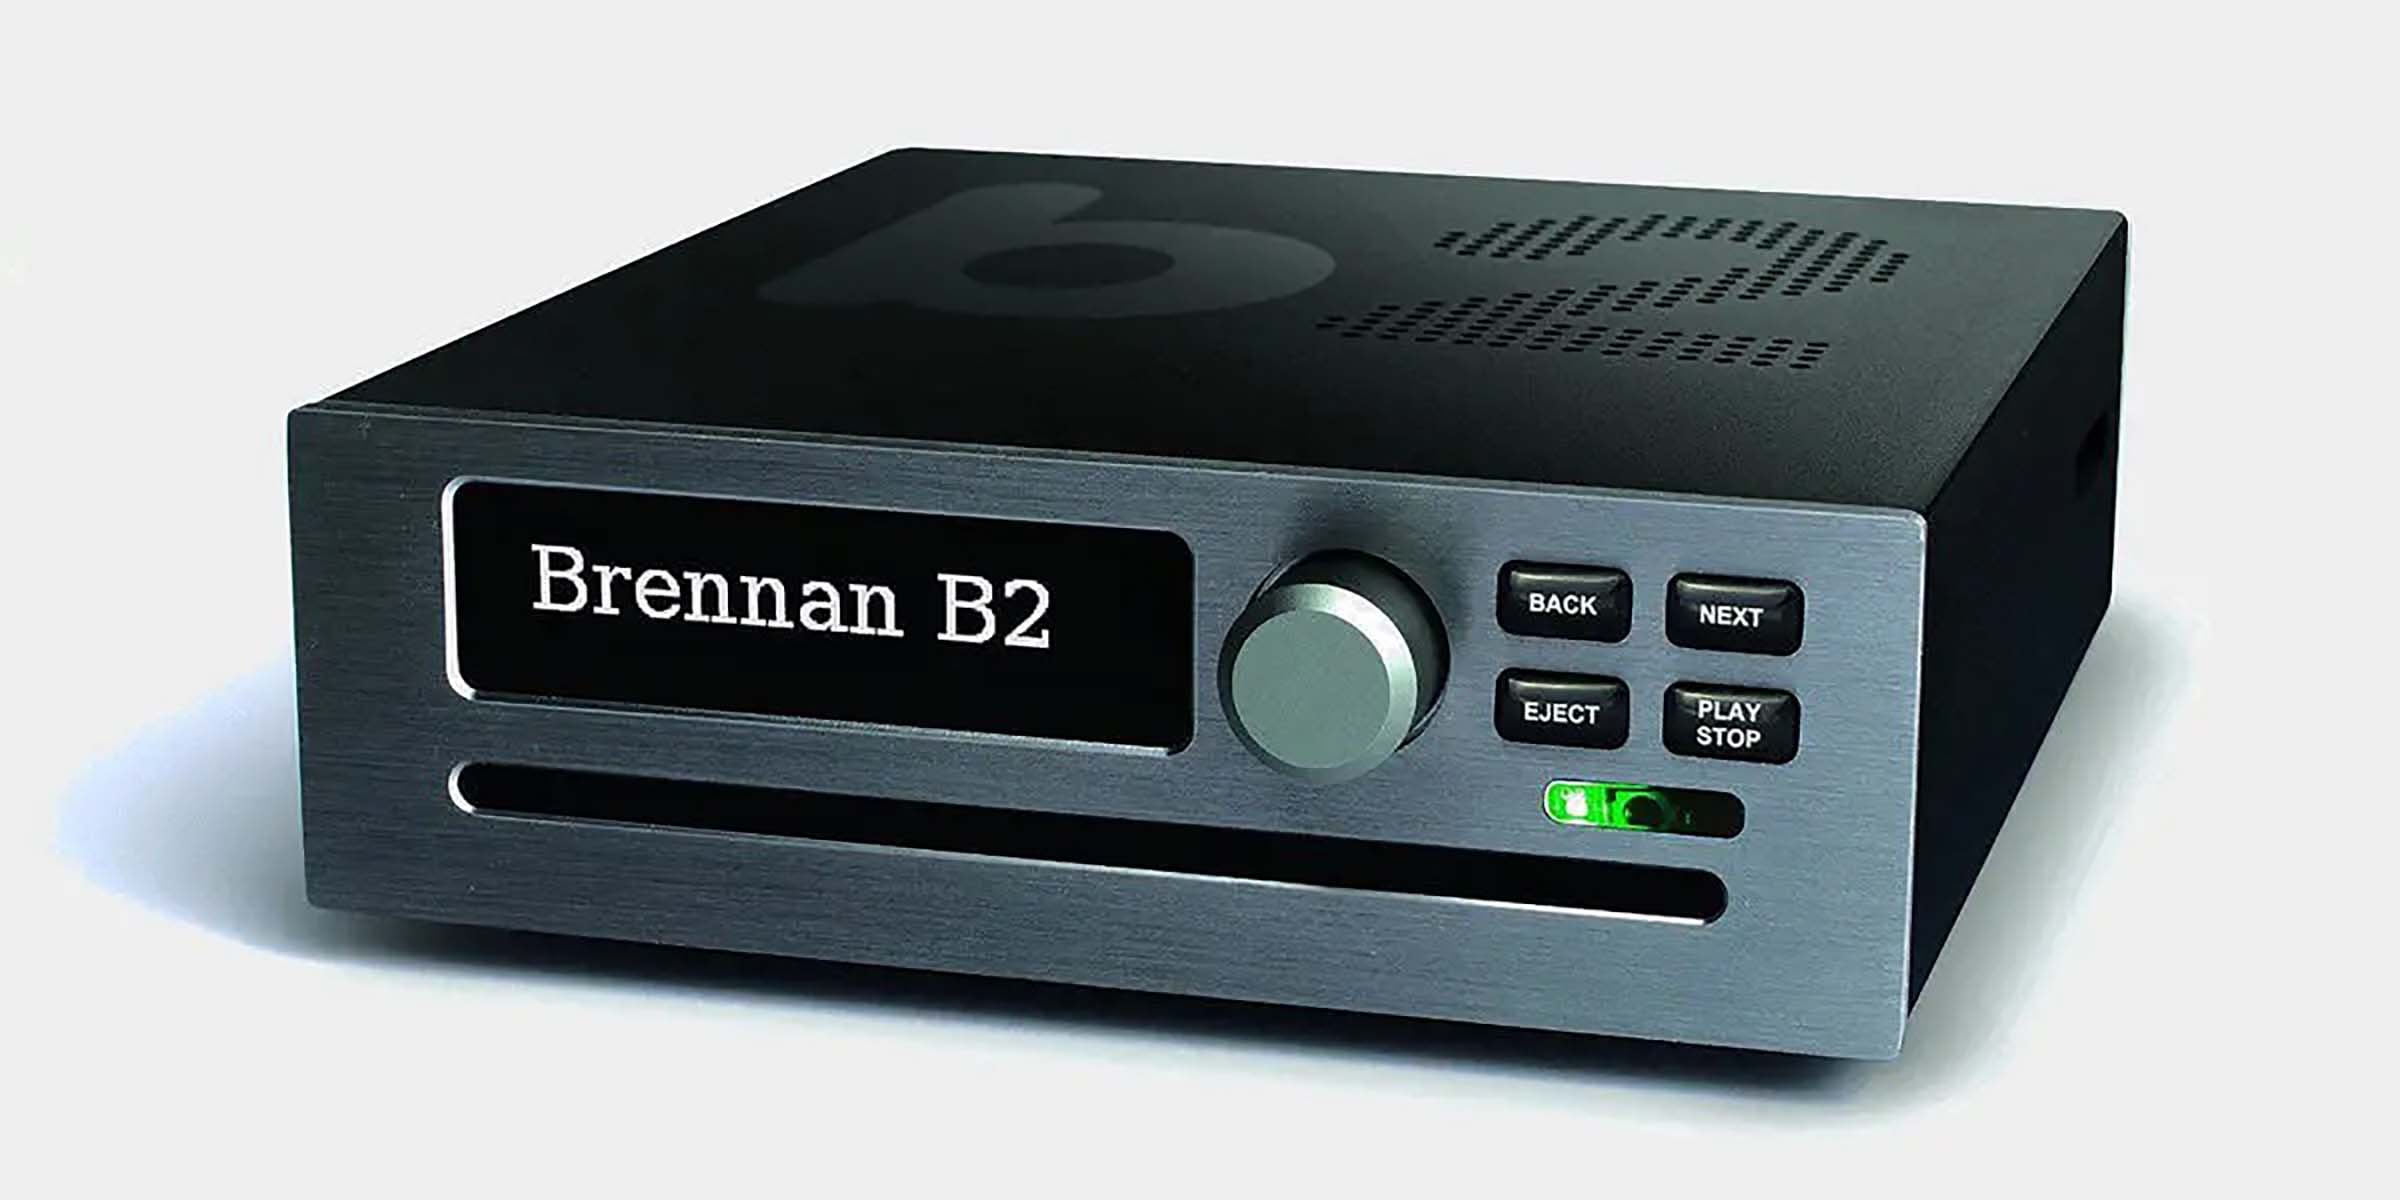 CDs are Great – brennan